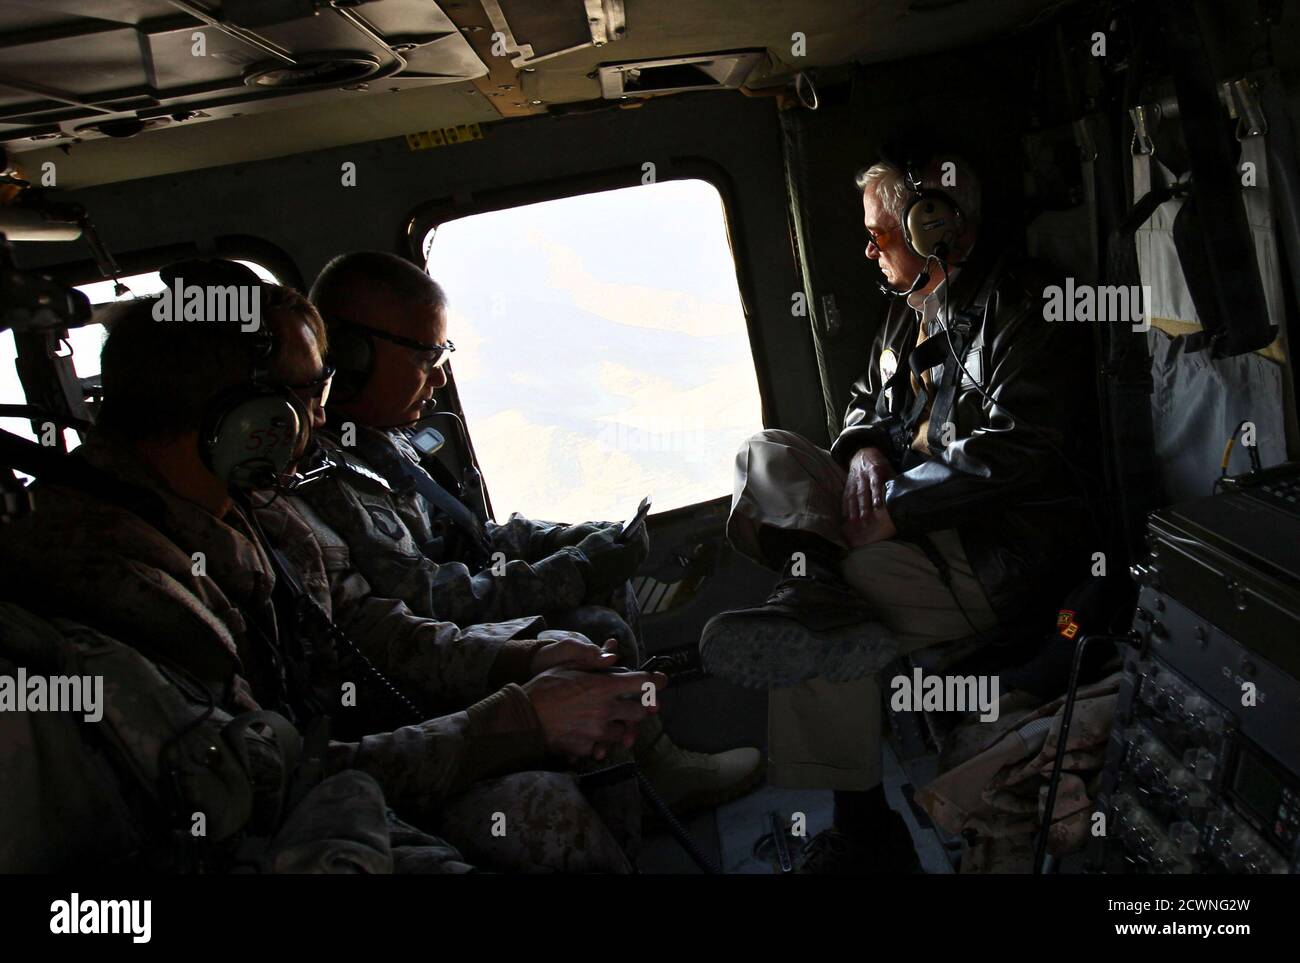 U.S. Secretary of Defense Robert Gates (R) receives a briefing from Major Gen. John Campbell (C) while flying aboard a helicopter over Kunar Province on his way to meet U.S. soldiers in Afghanistan, December 7, 2010. Gates arrived today in Afghanistan for an unannounced visit during a tour of the region this week. The White House is conducting a review of the war in Afghanistan a year after President Barack Obama unveiled a revised strategy to battle Taliban militants and ease violence in one of the world's poorest nations.  REUTERS/Win McNamee/Pool  (AFGHANISTAN - Tags: MILITARY POLITICS) Stock Photo